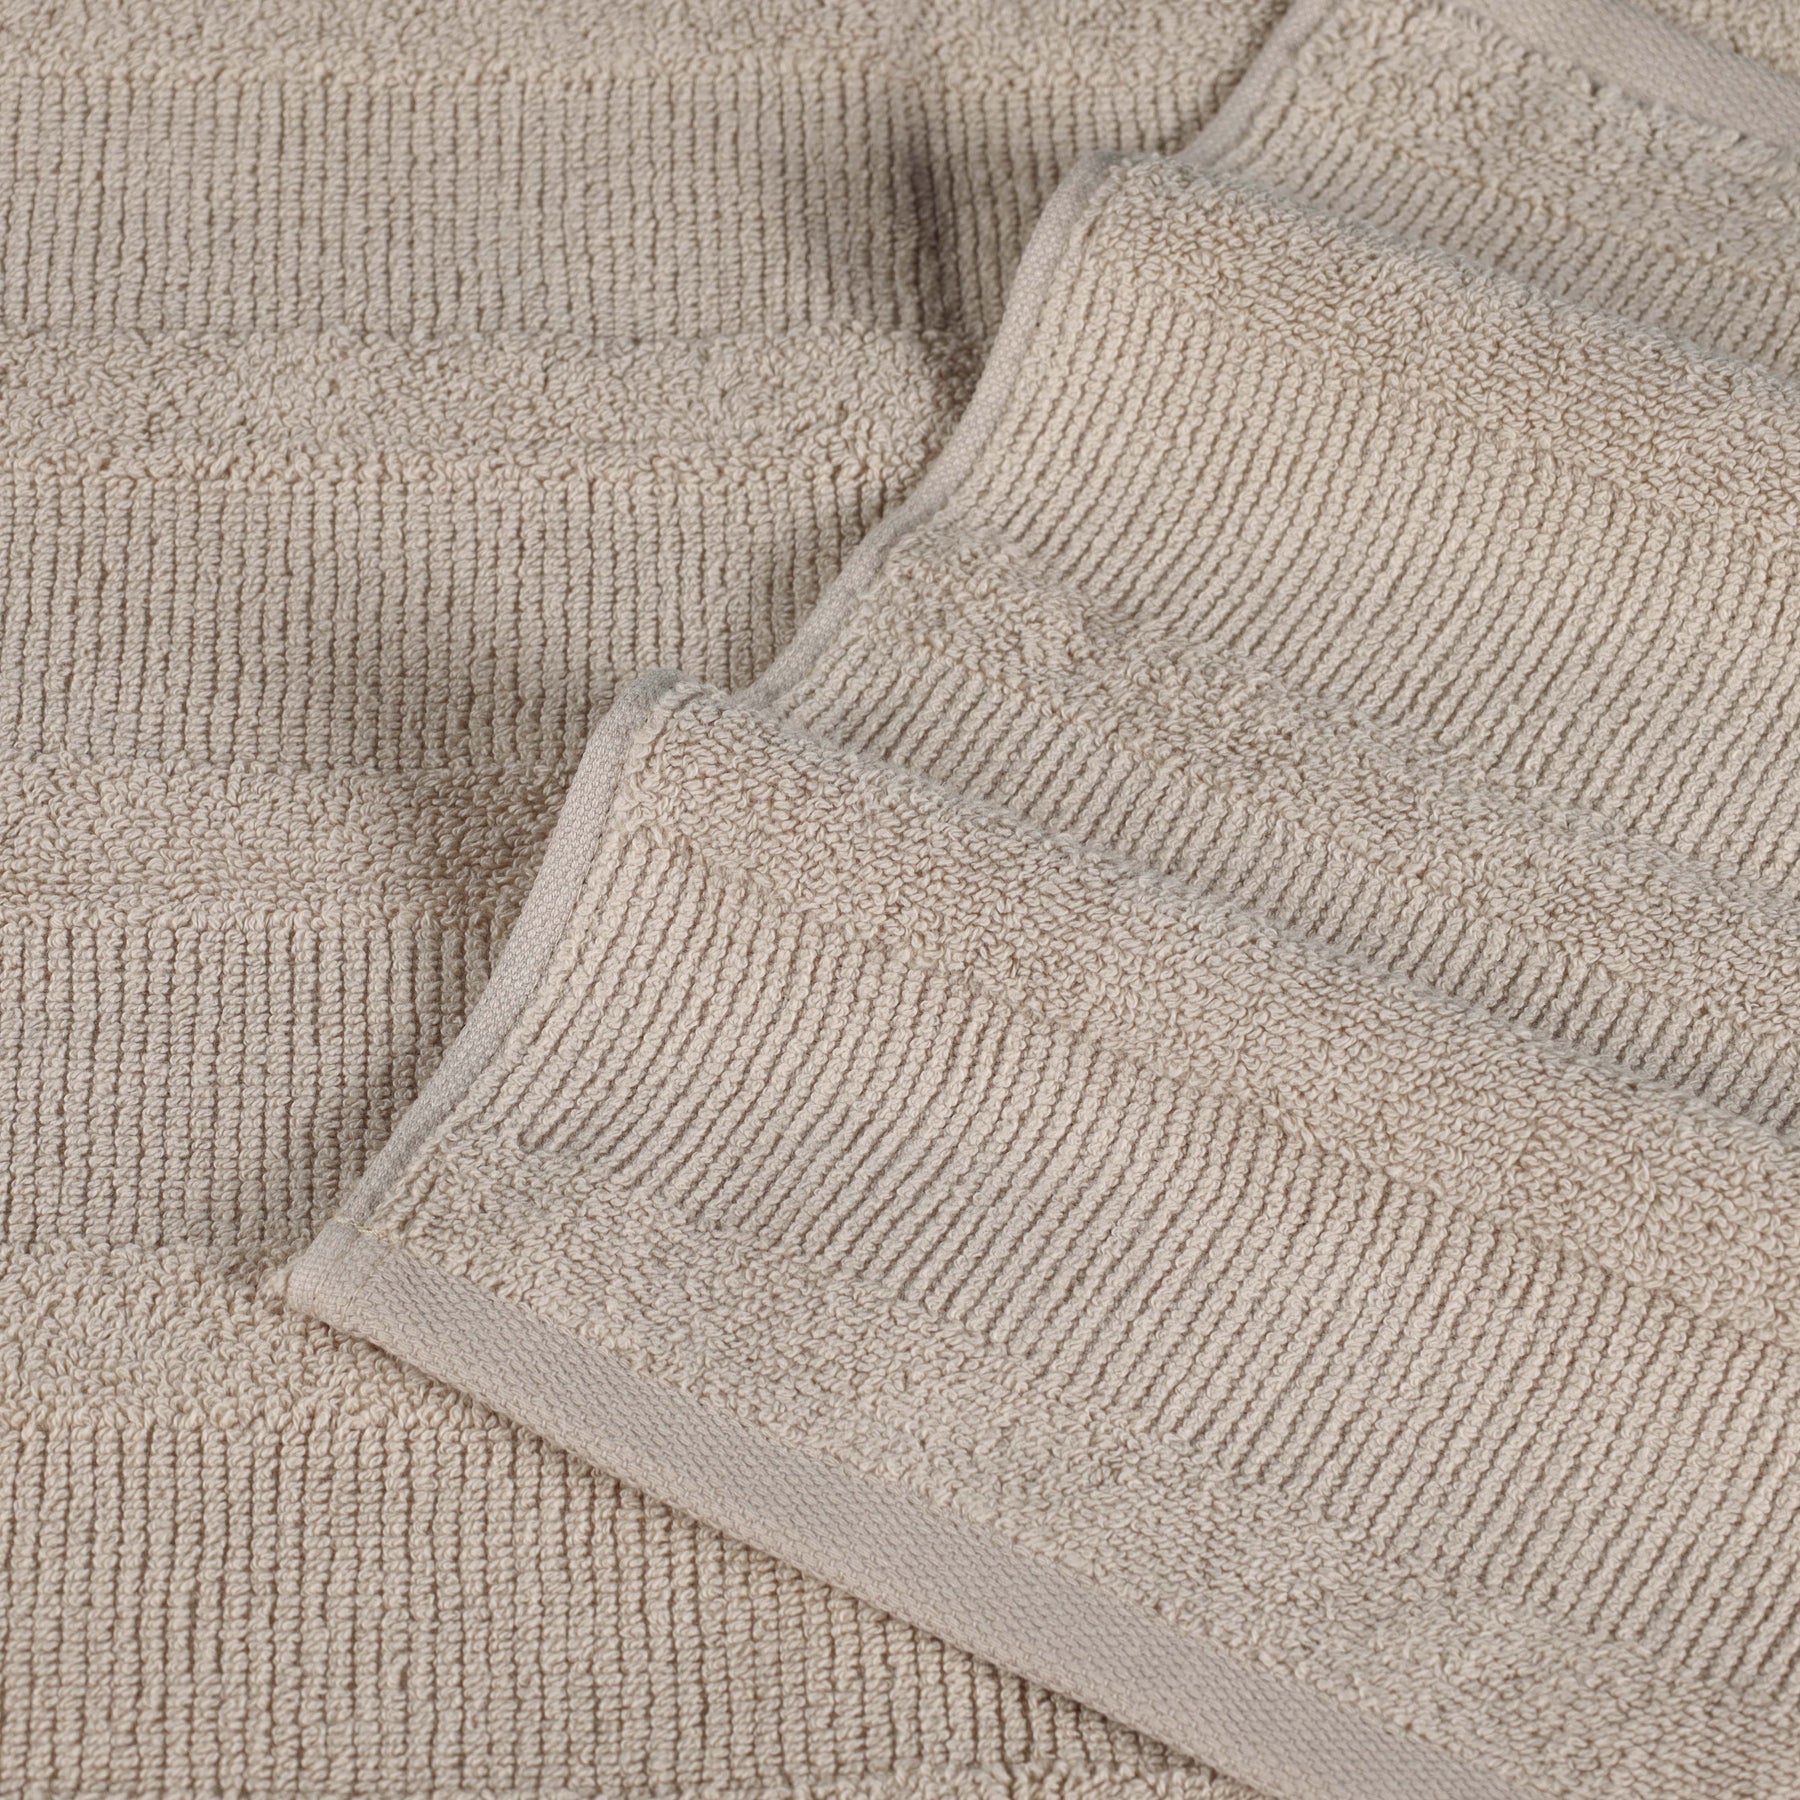 Roma Cotton Ribbed Textured Soft Absorbent 12 Piece Assorted Towel Set - Stone